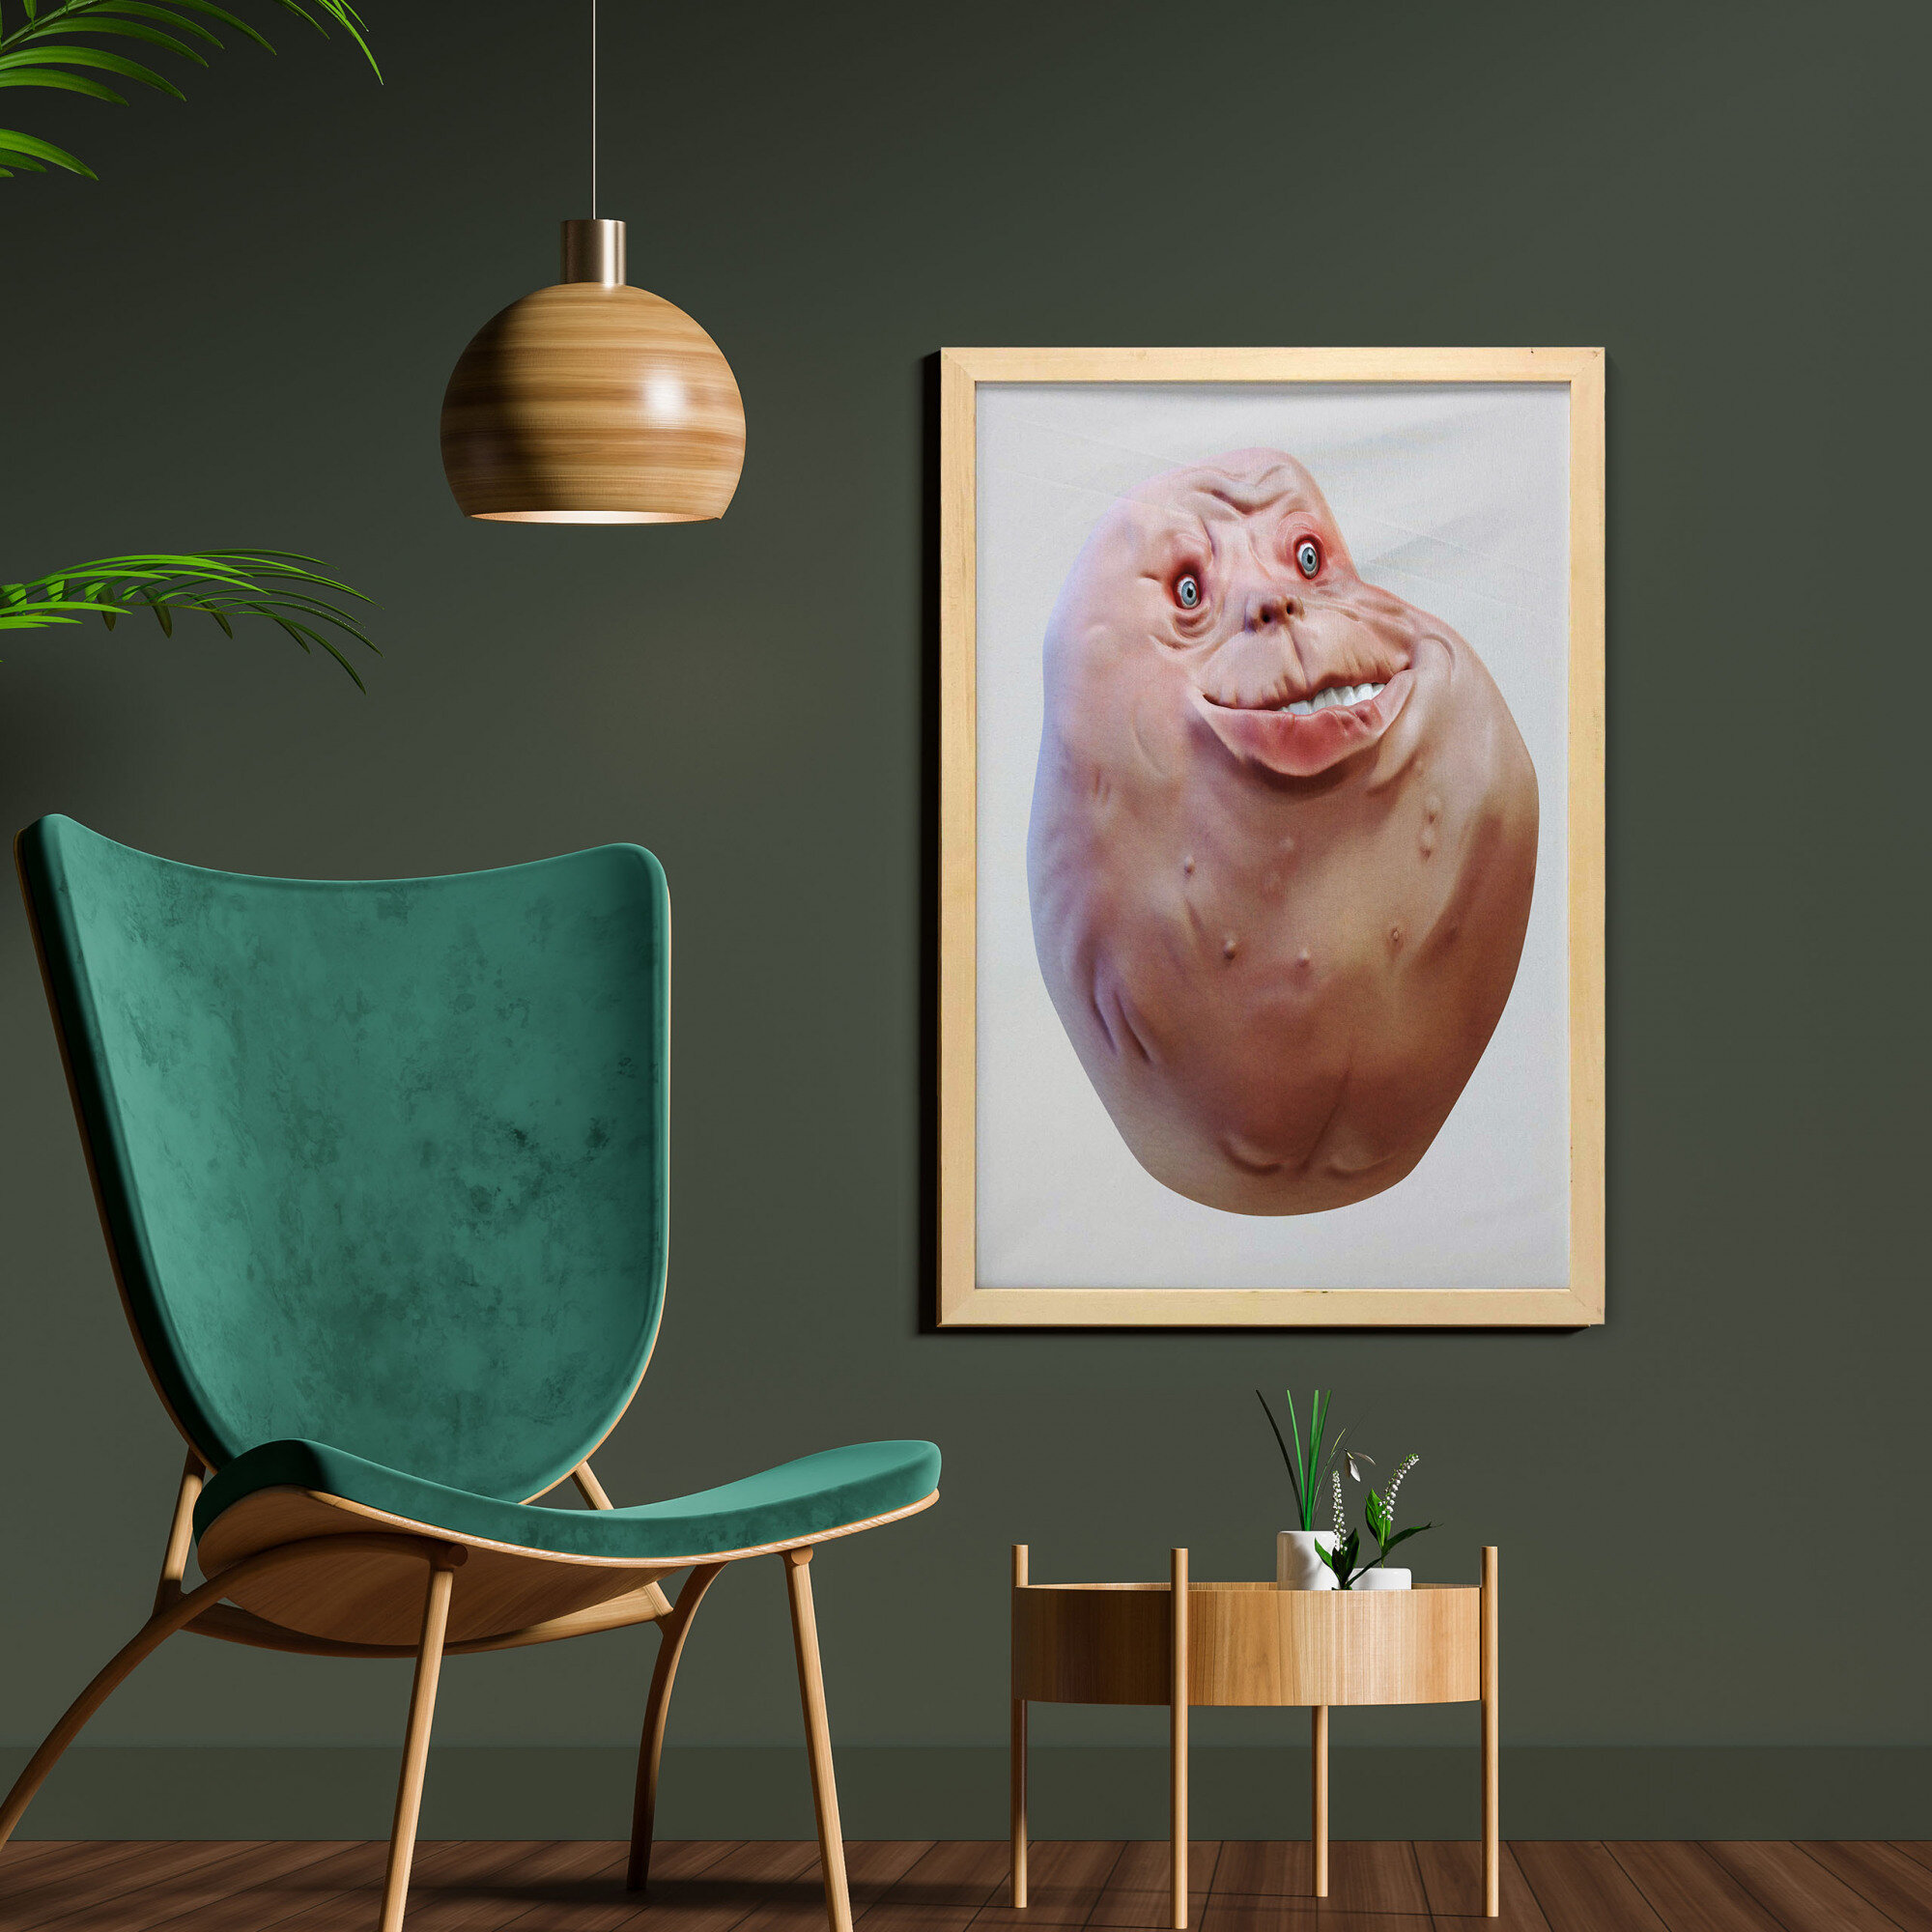 Anatomy Of A Blobfish | Funny Ugly Fish Meme | Poster